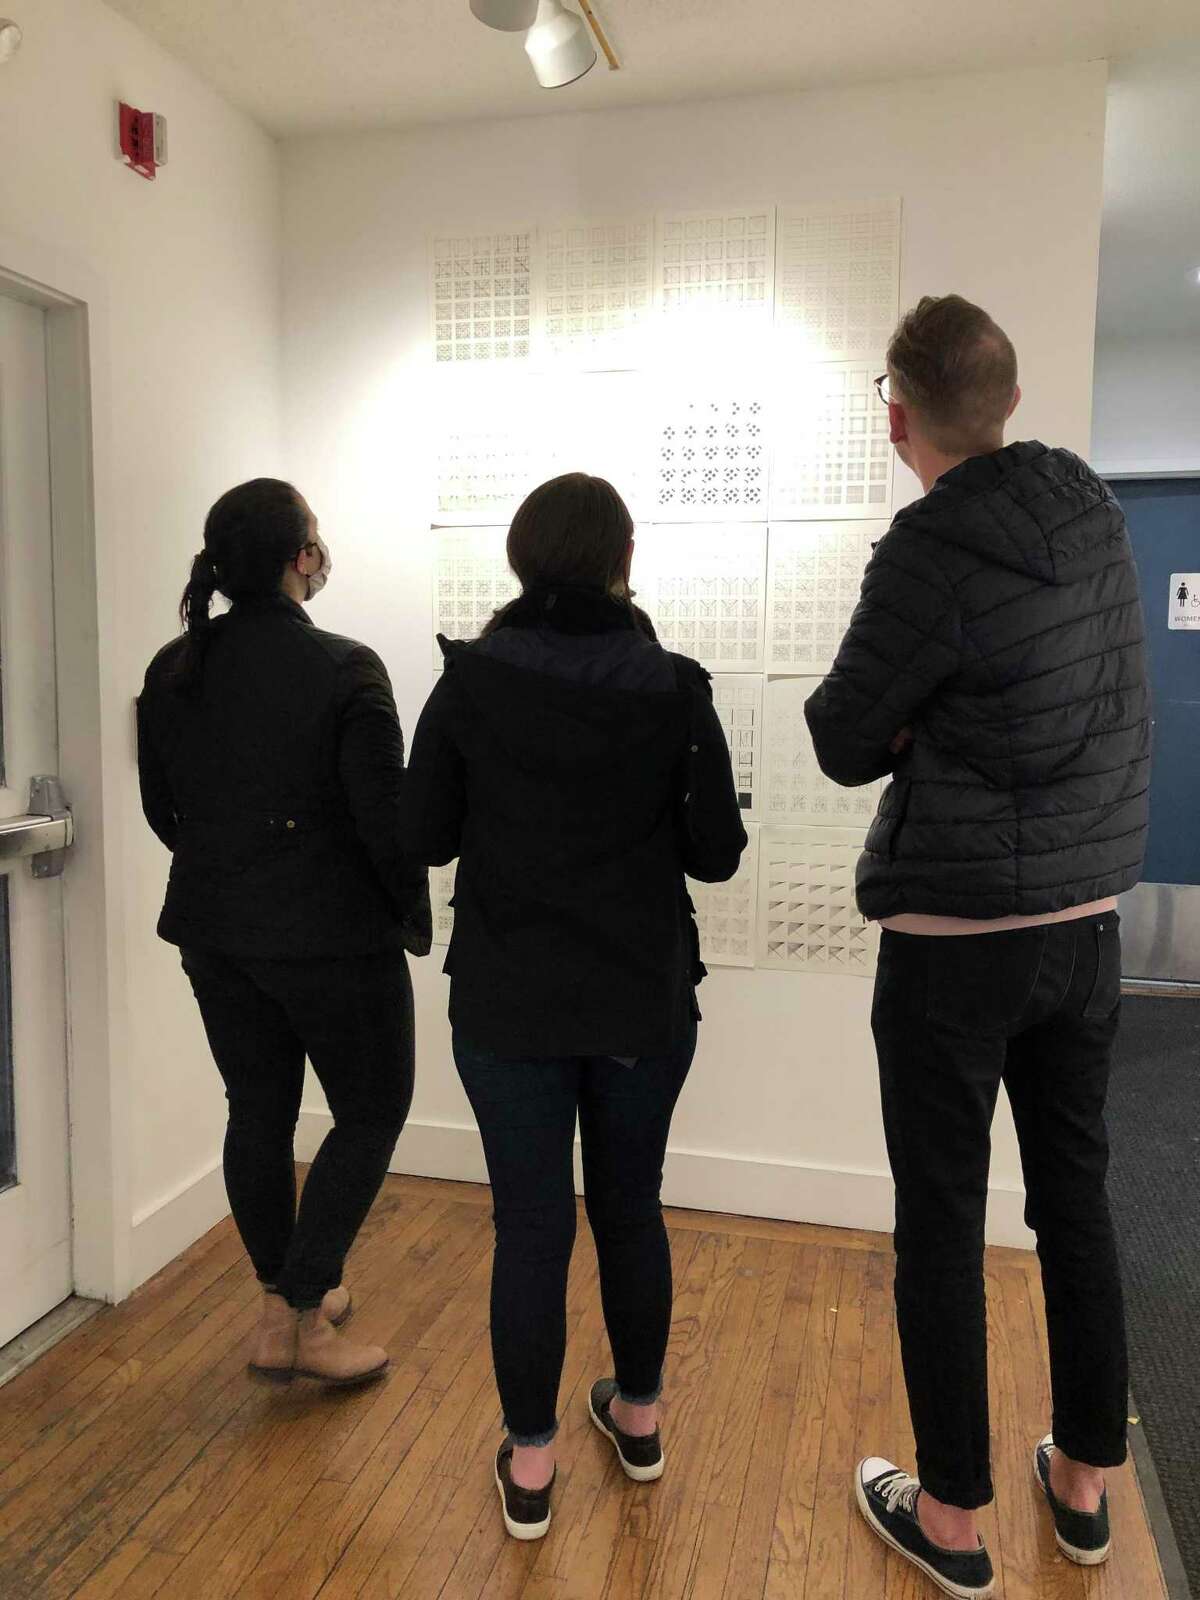 Attendees at the "Teen Fusion" show at Silvermine School of Art take in the work of a P-TECH art student. The exhibit features student artwork from the college-level graphic design class at the high school.